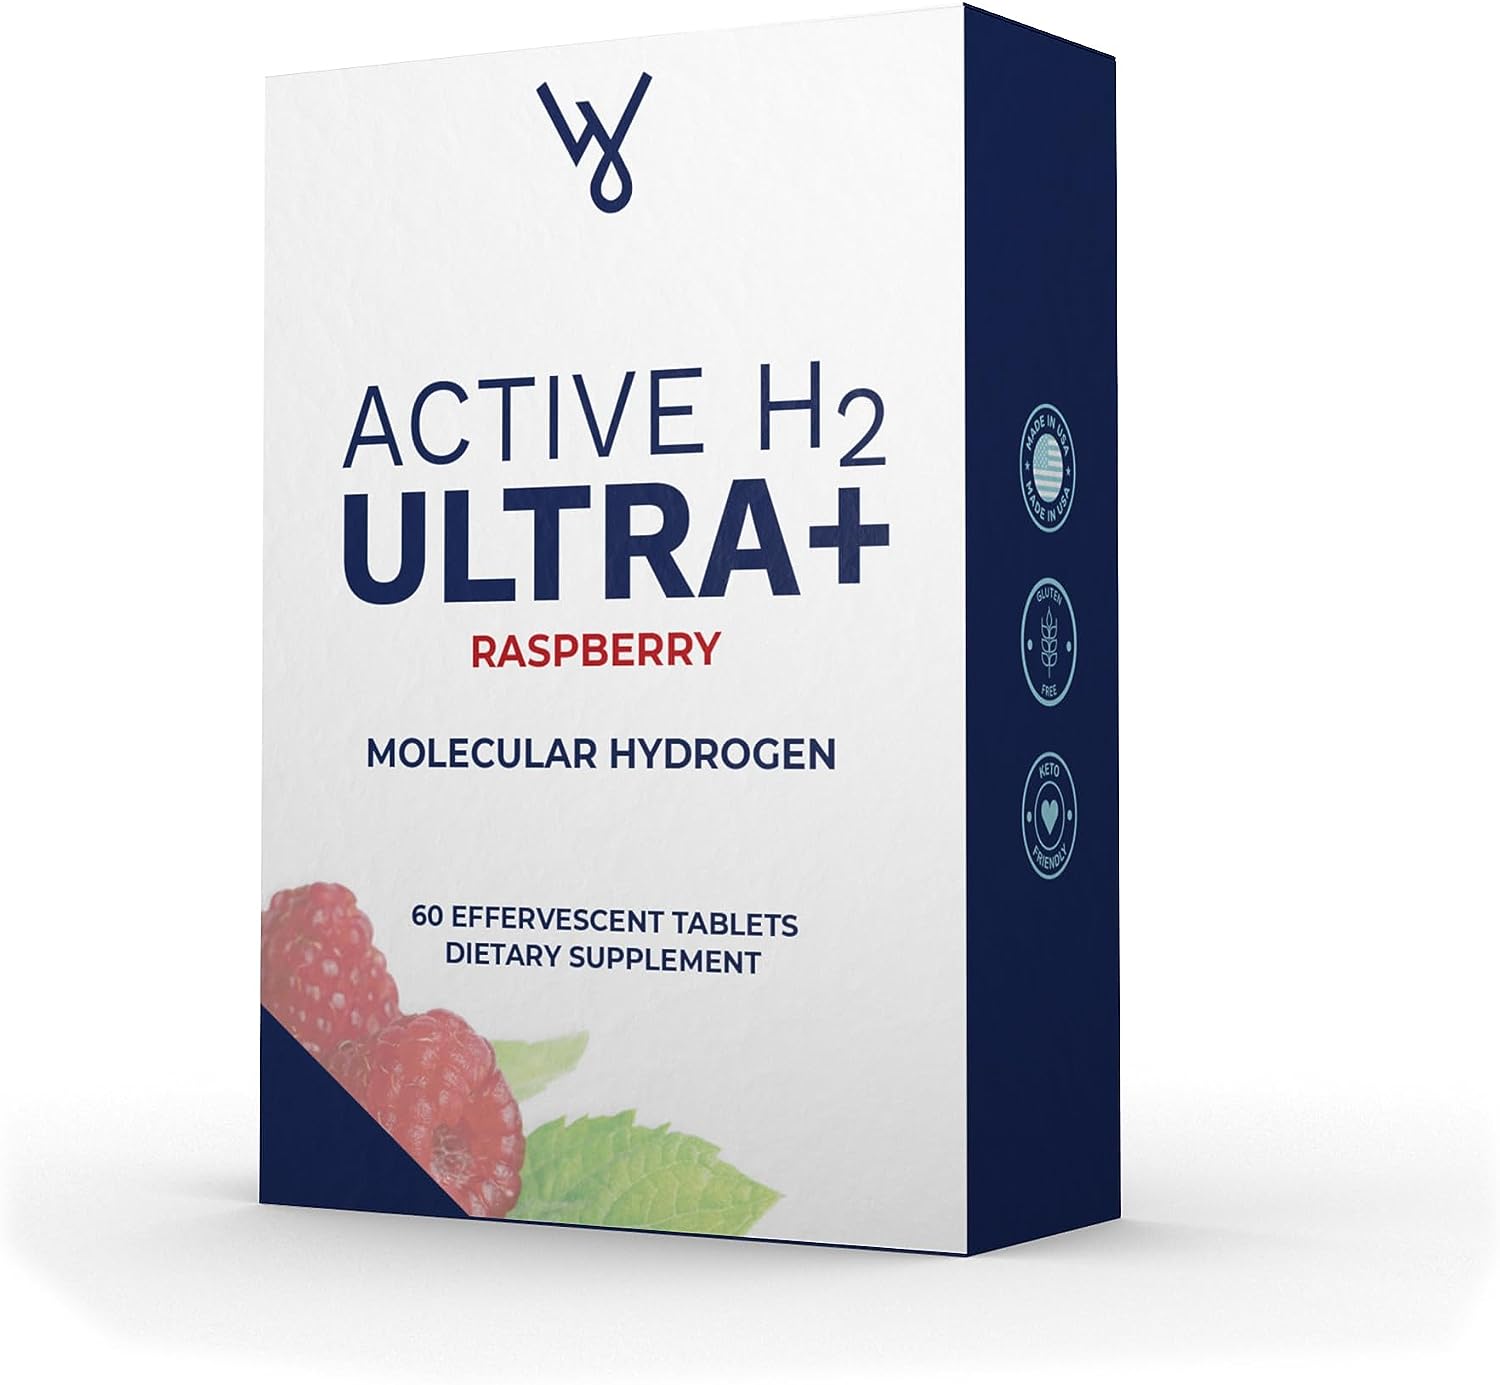 Active H2 Ultra+ Natural Raspberry Flavored Molecular [...]